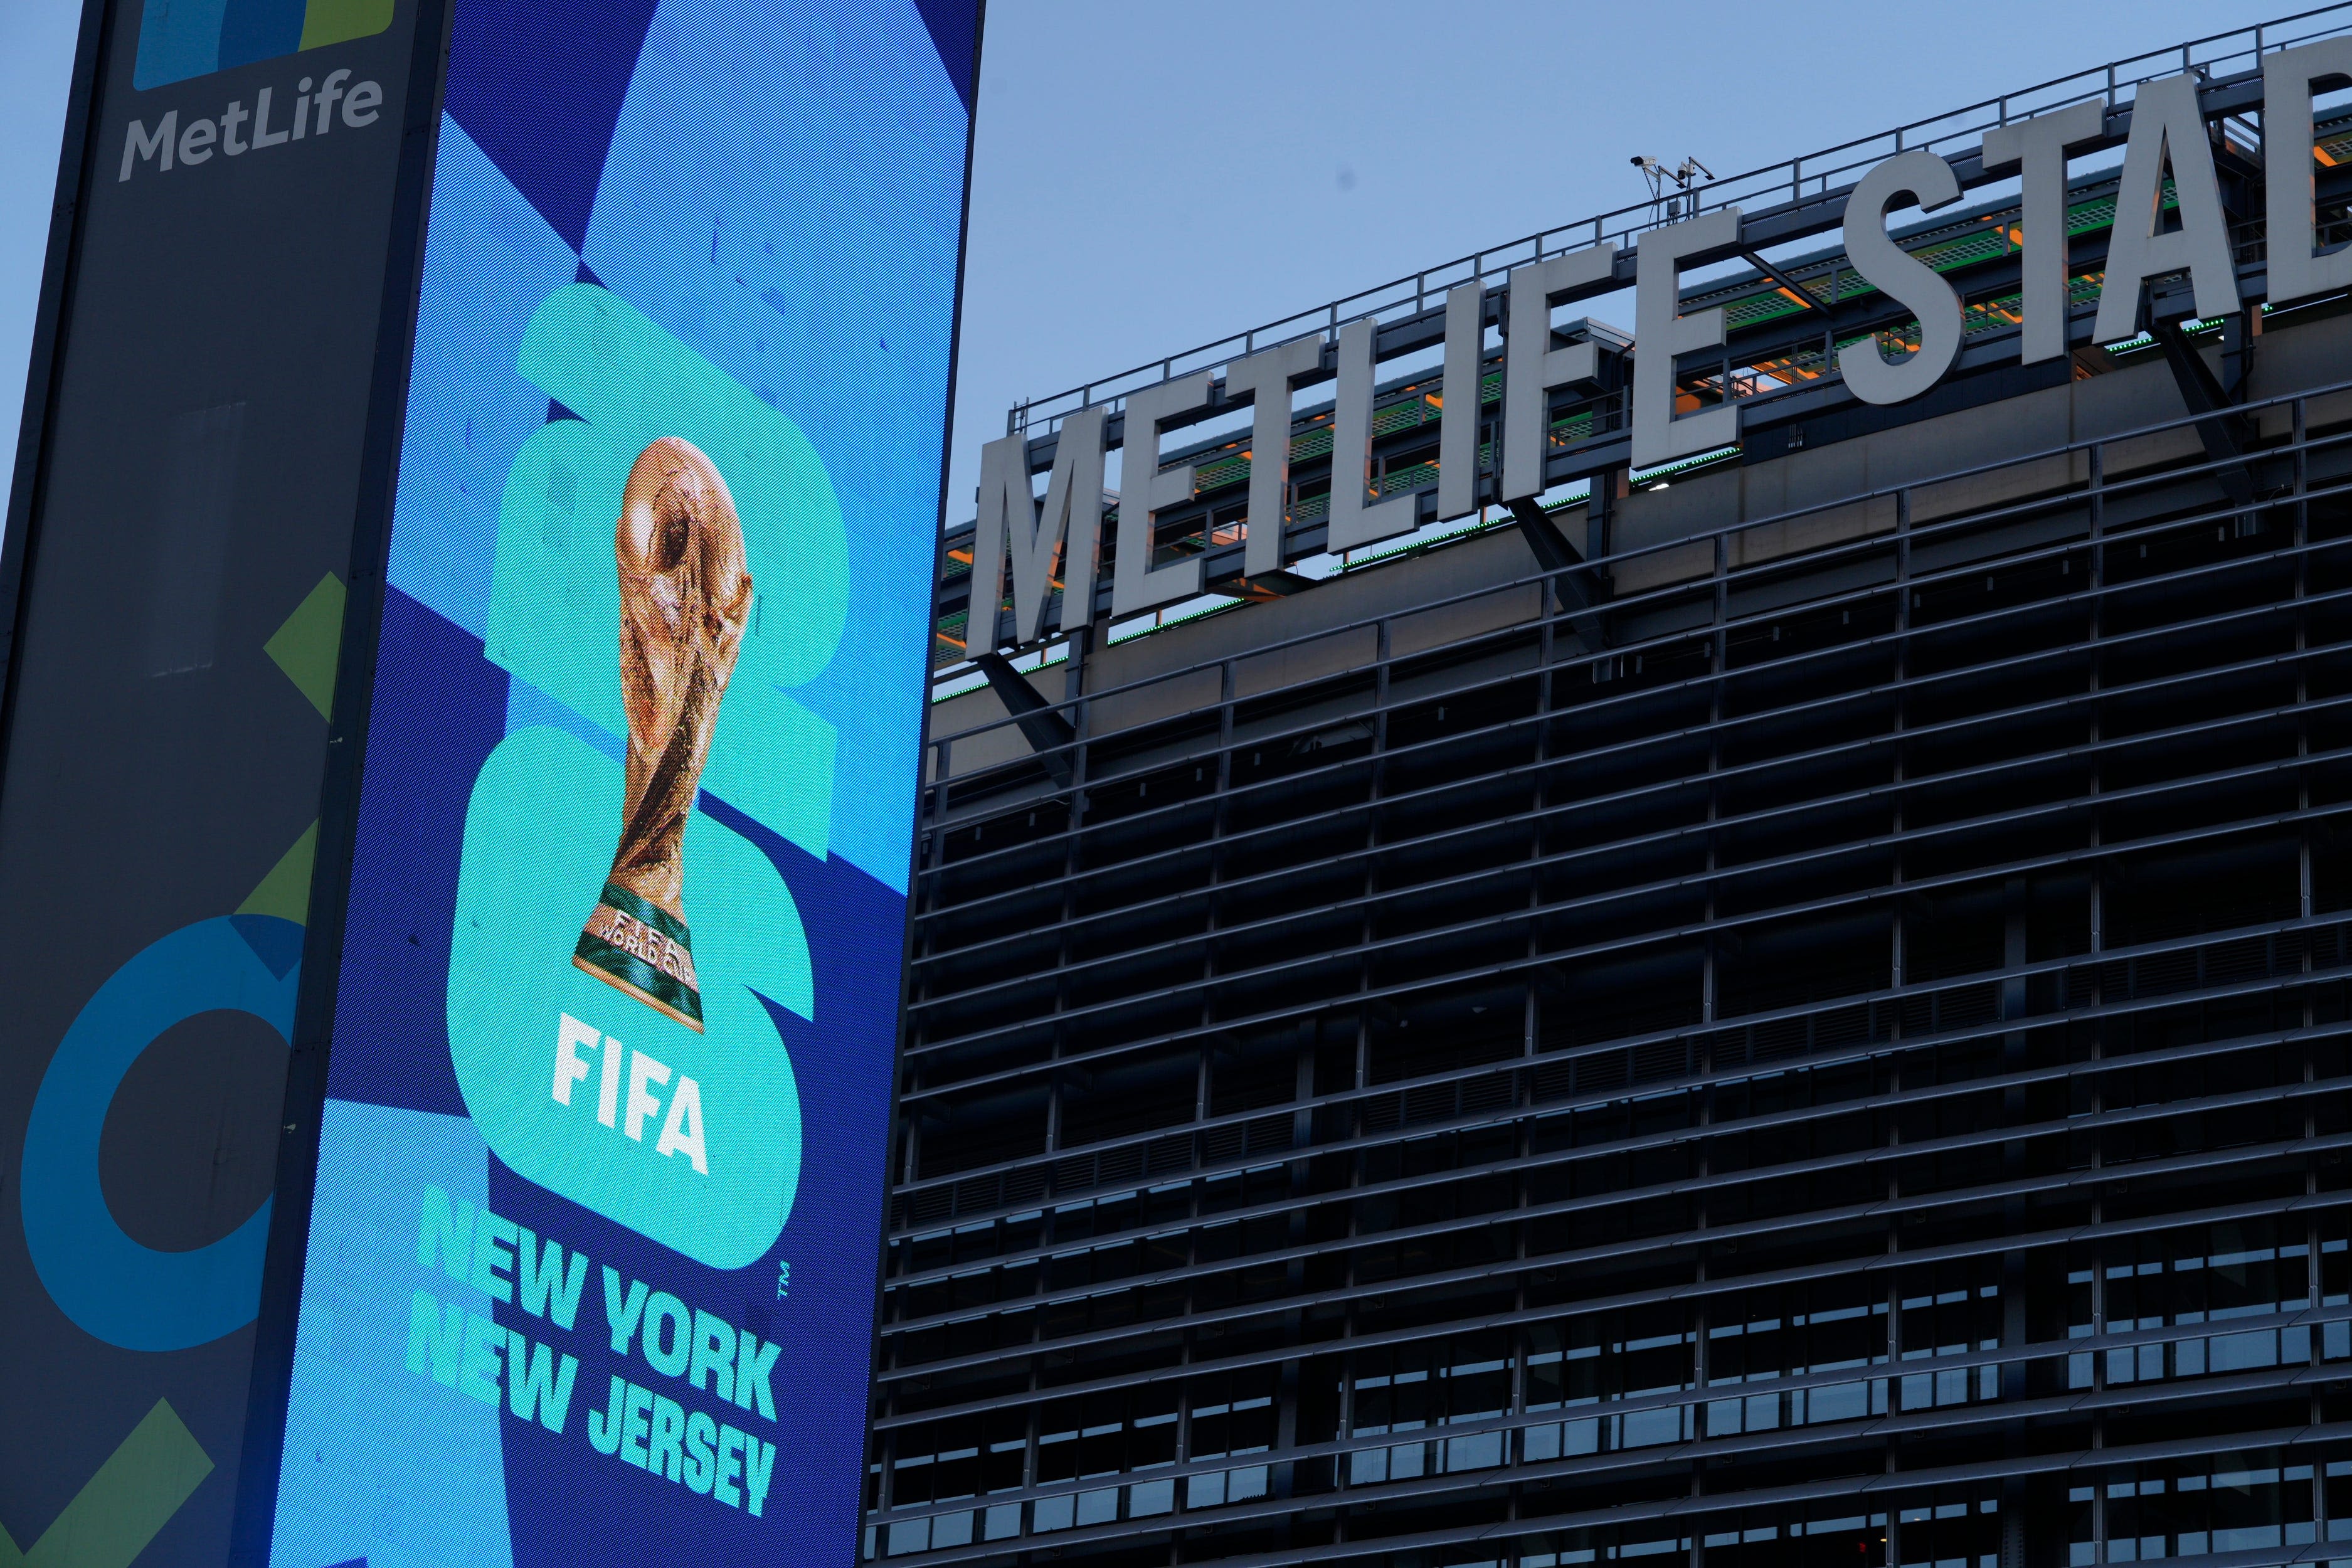 Poll finds one-third of NJ residents are aware of the state hosting games in the 2026 FIFA World Cup. How they feel